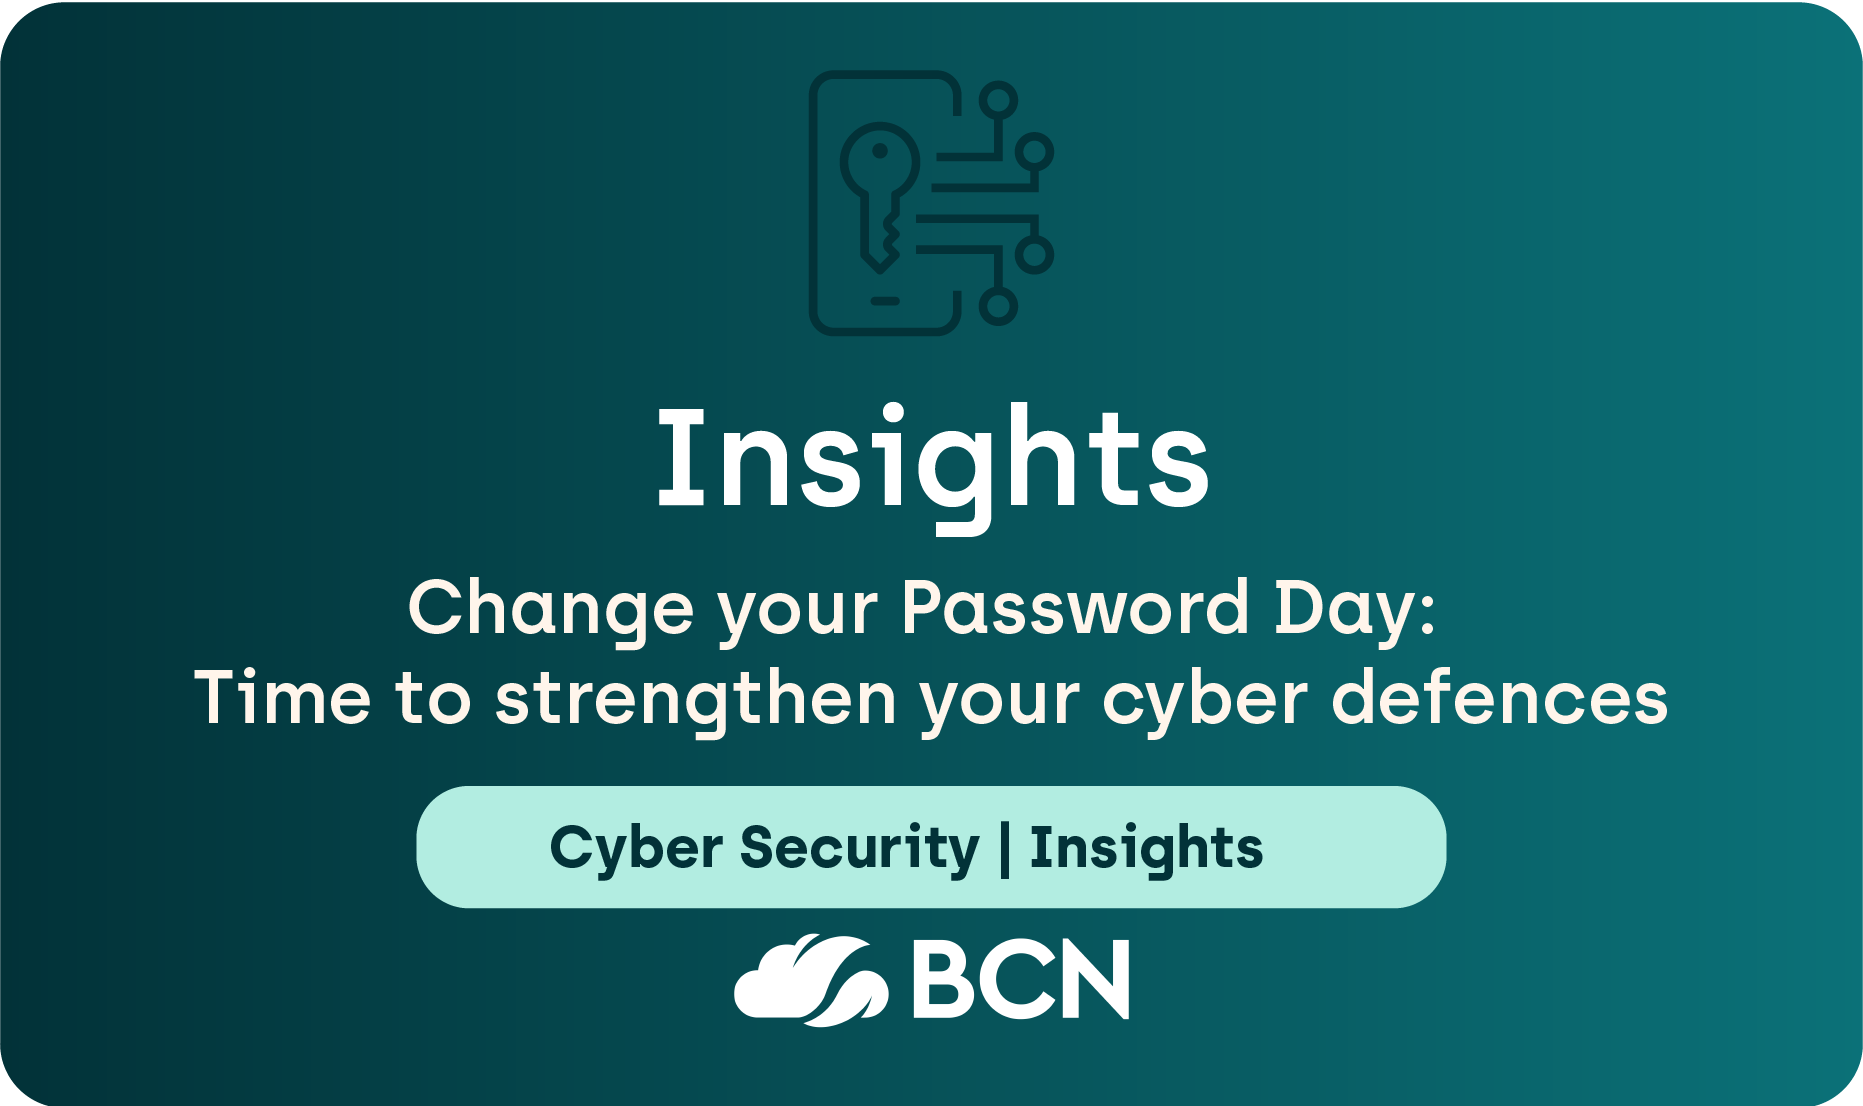 Change Your Password Day: Time to strengthen your cyber defences